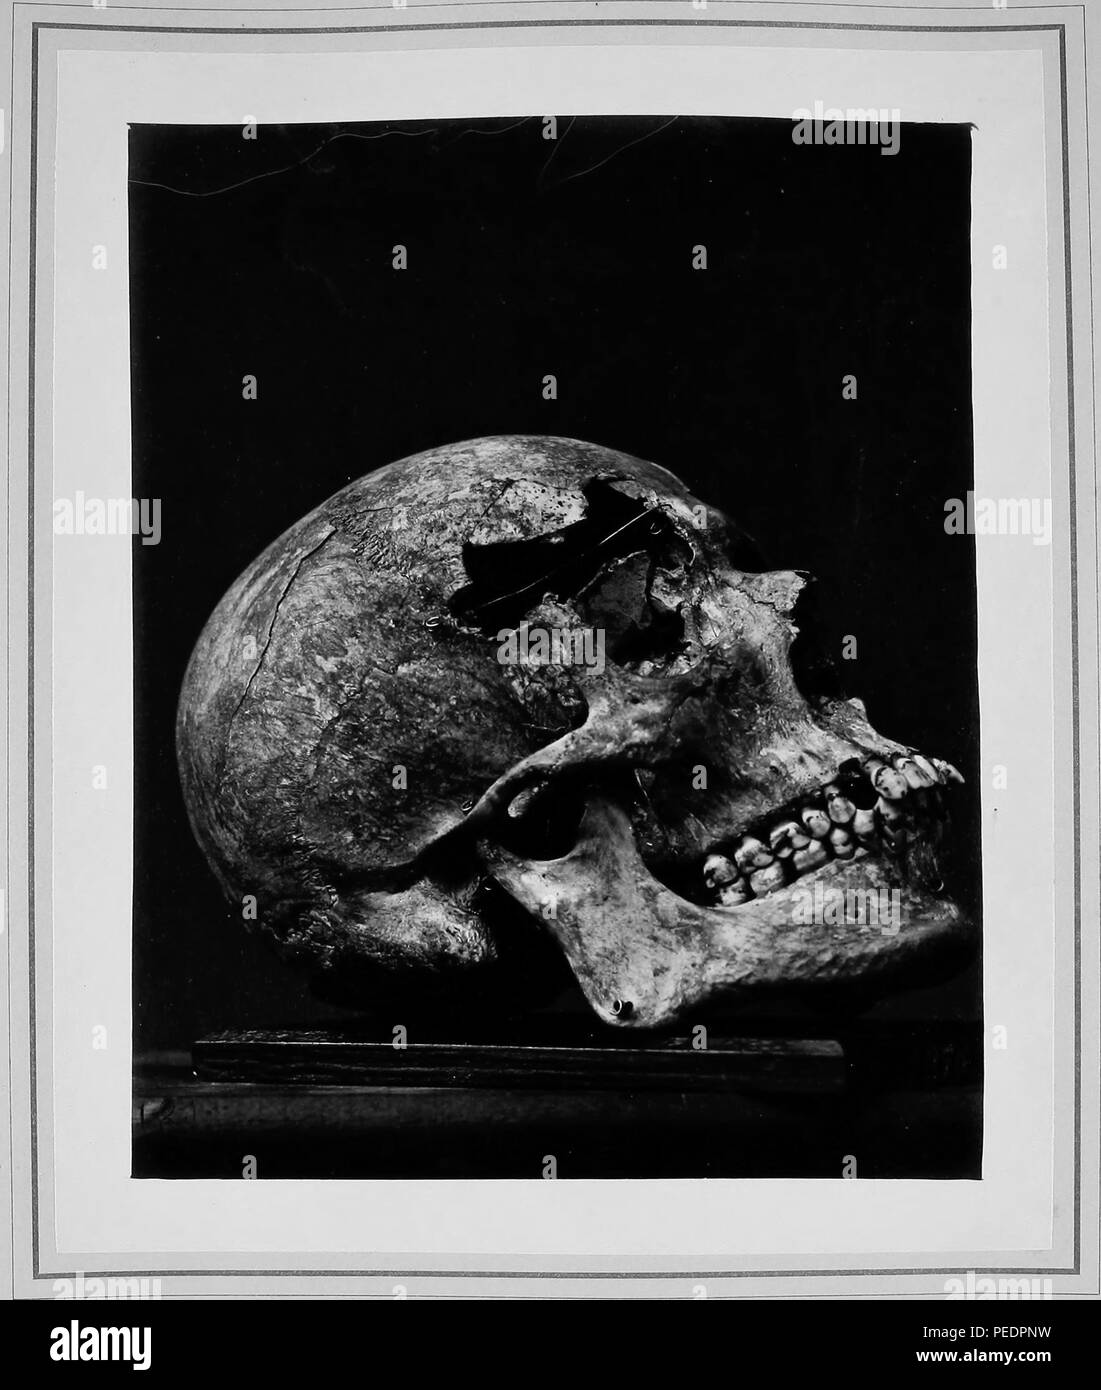 Black and white photograph showing the fractured cranium of Private Edward Volk, who was wounded August 30, 1862, at the second battle of Bull Run, by a musket ball, which struck his forehead half an inch above the right eyebrow, 1865. Courtesy Internet Archive. () Stock Photo